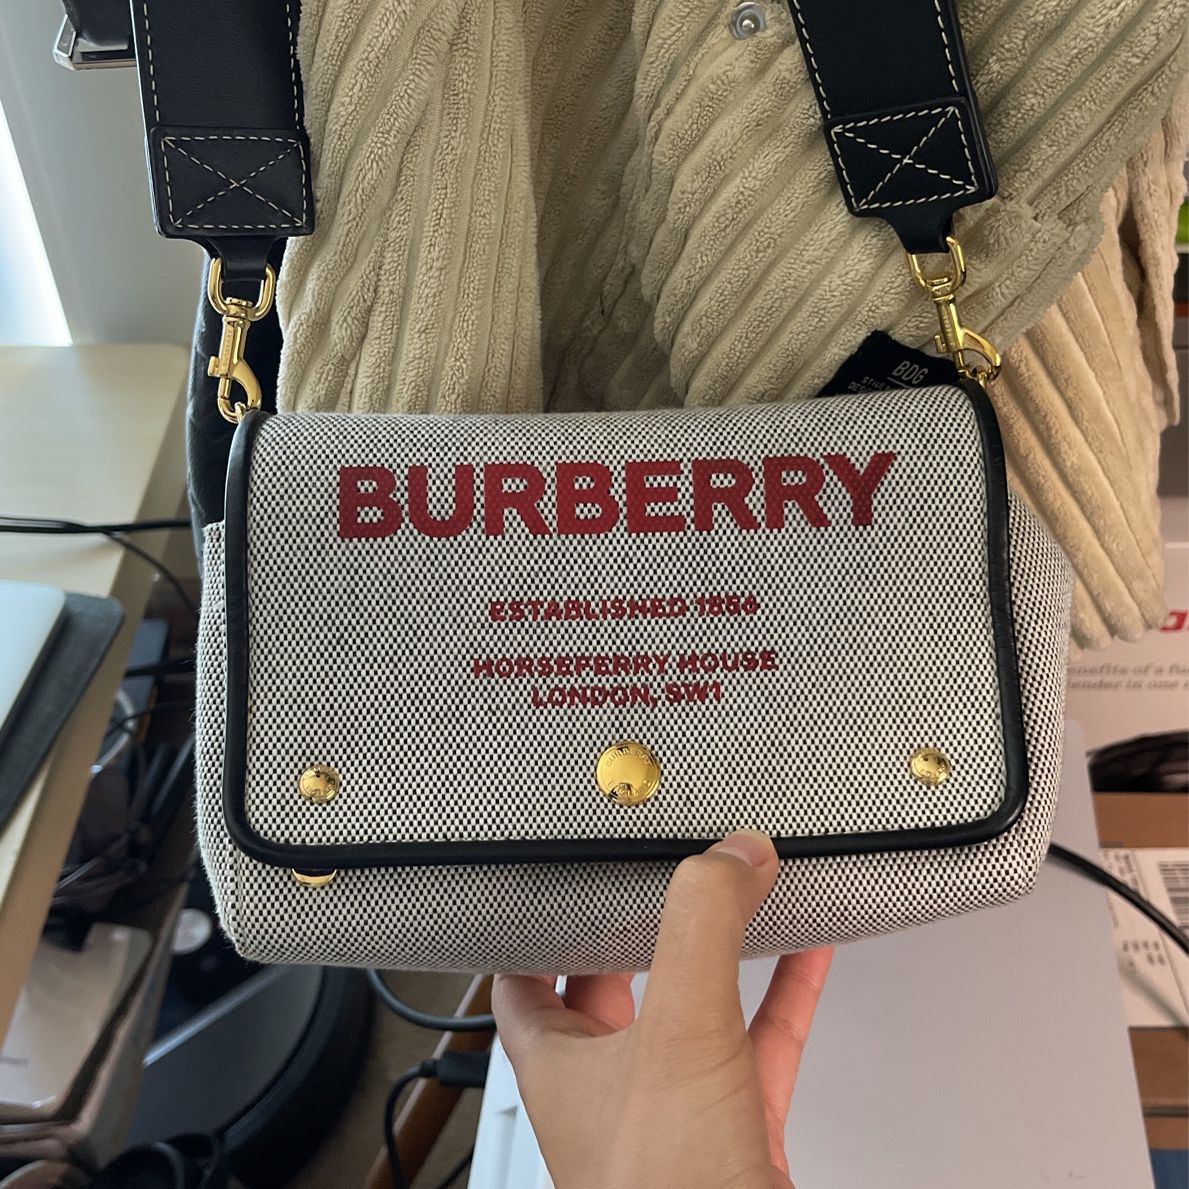 Small Authentic Burberry Crossbody for Sale in Spanaway, WA - OfferUp